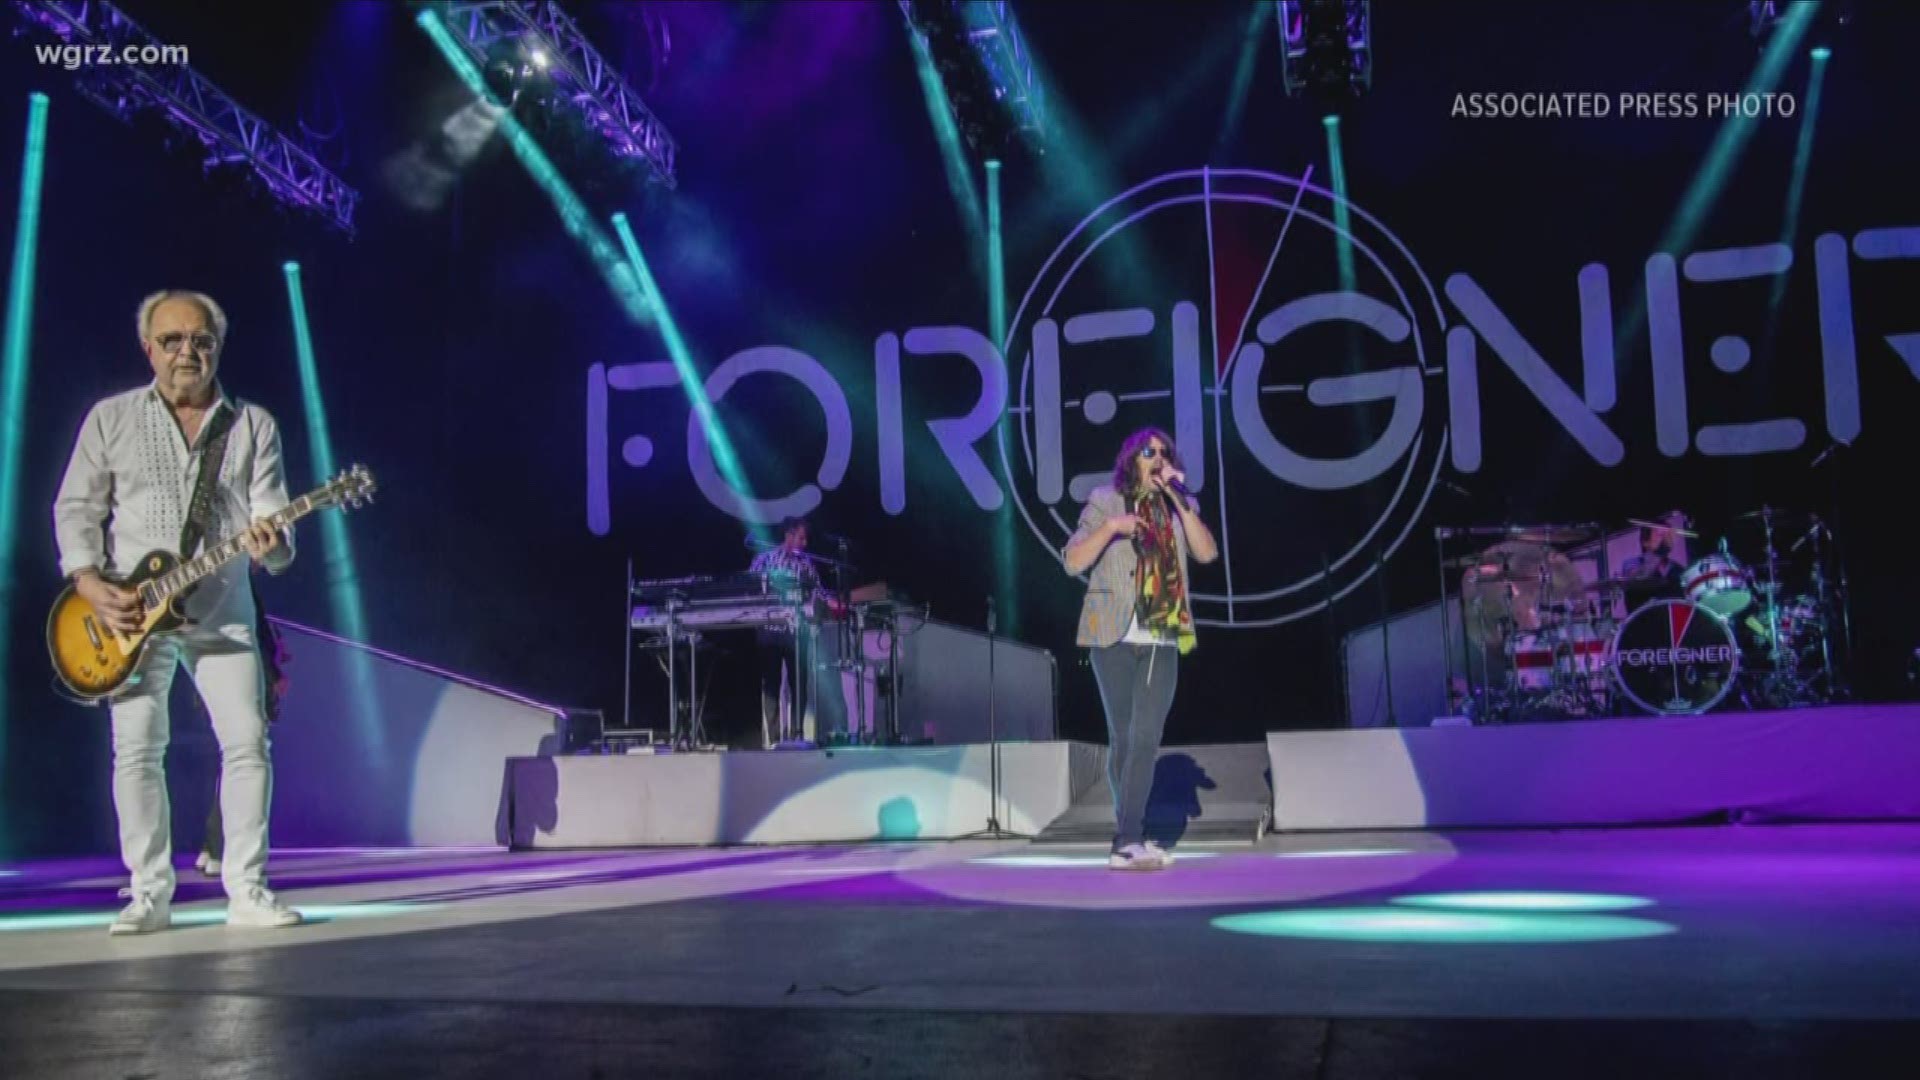 Foreigner coming to Darien Lake Aug. 7th